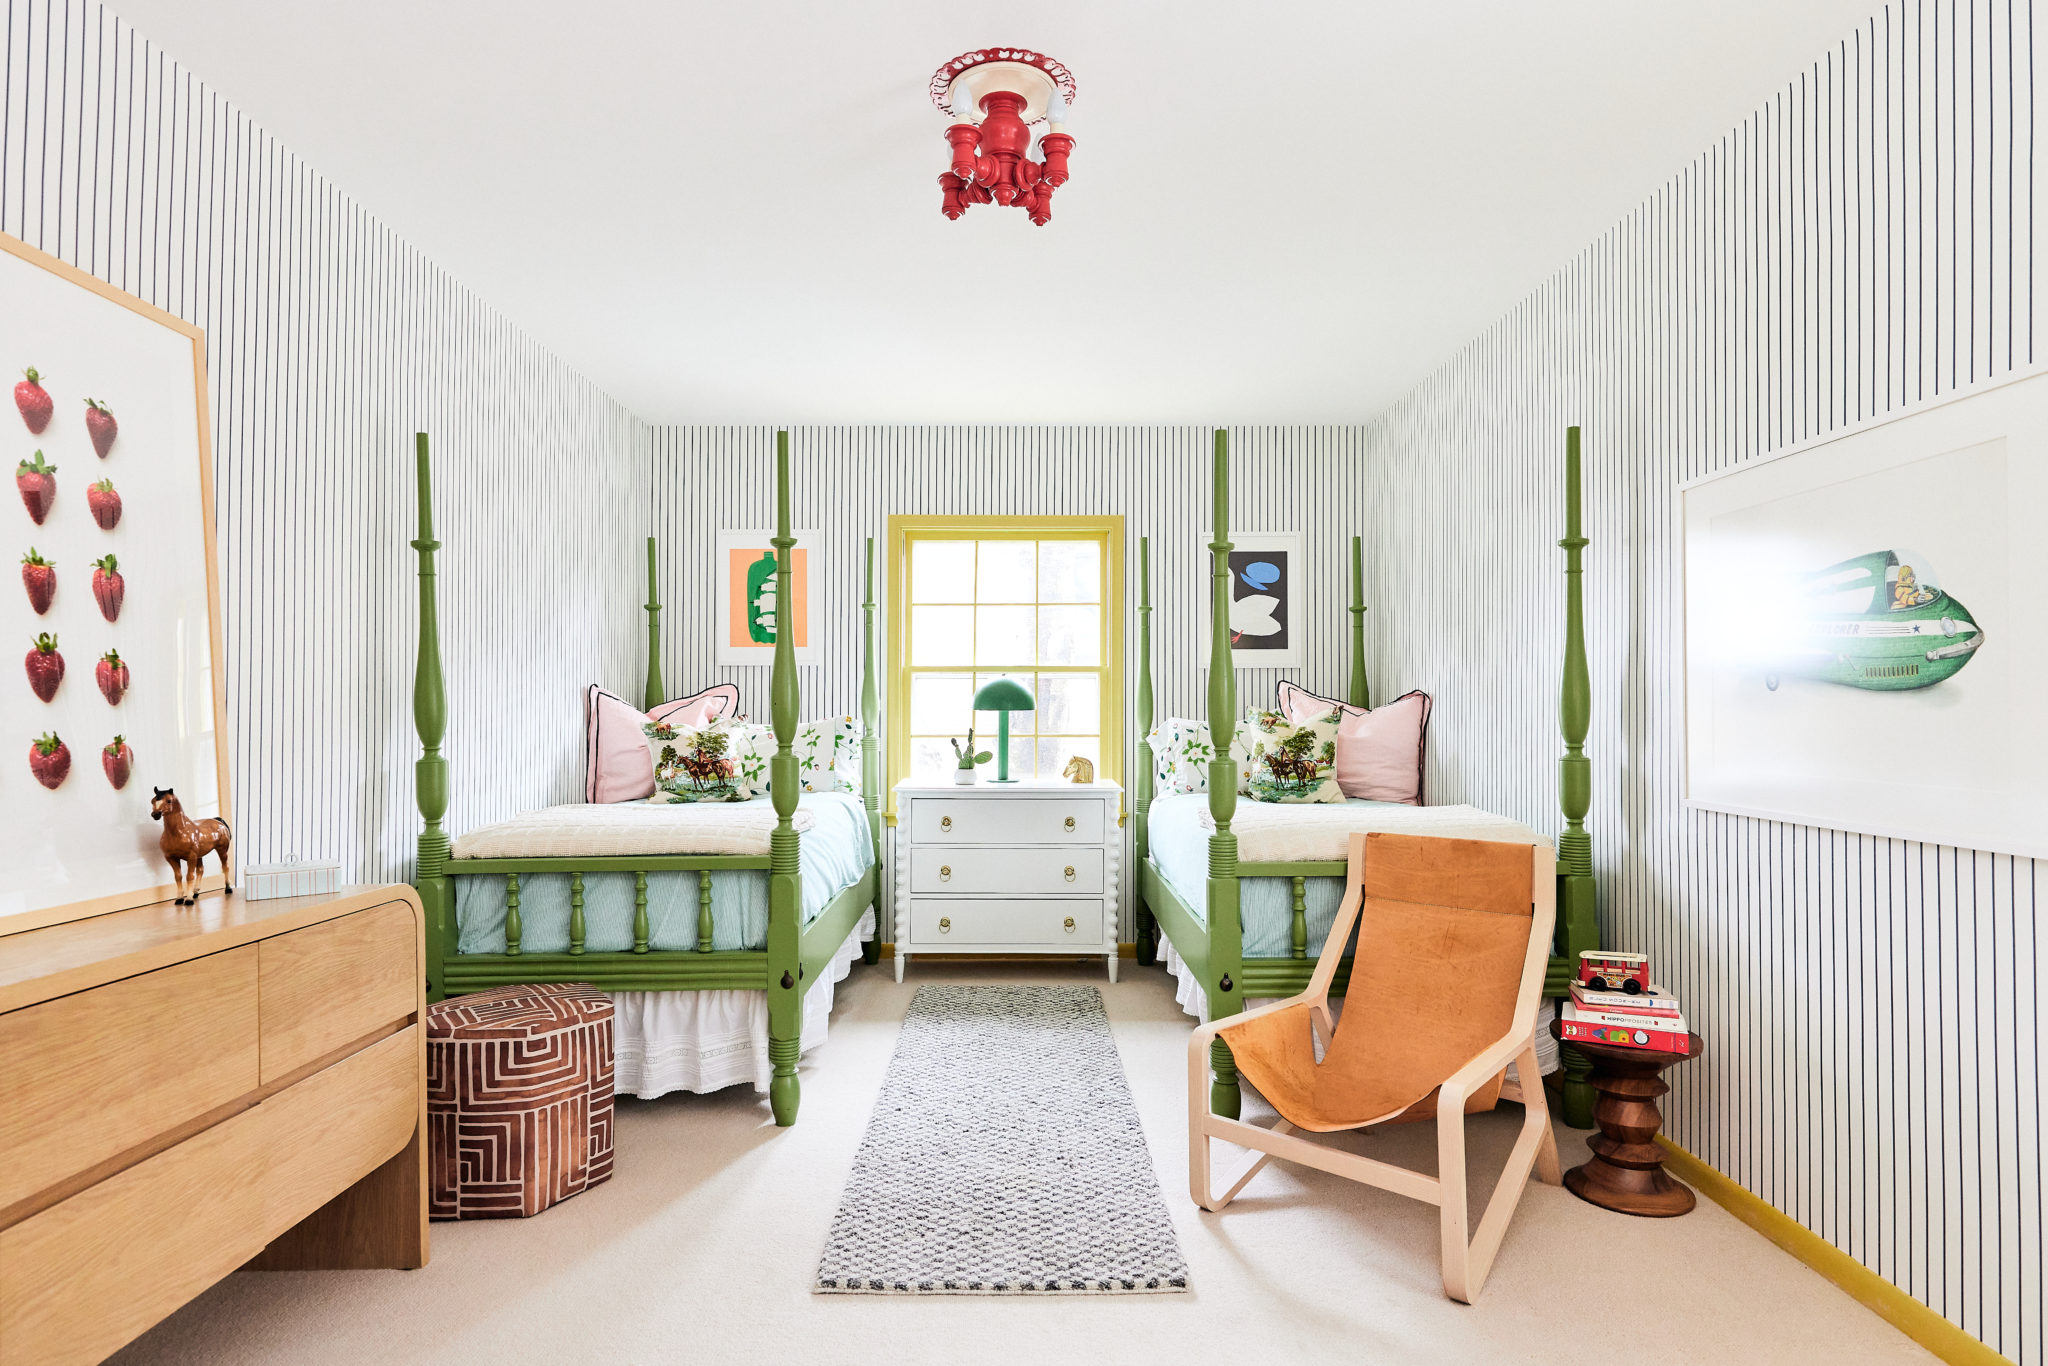 Kids’ Room Art: How to Select the Right Pieces